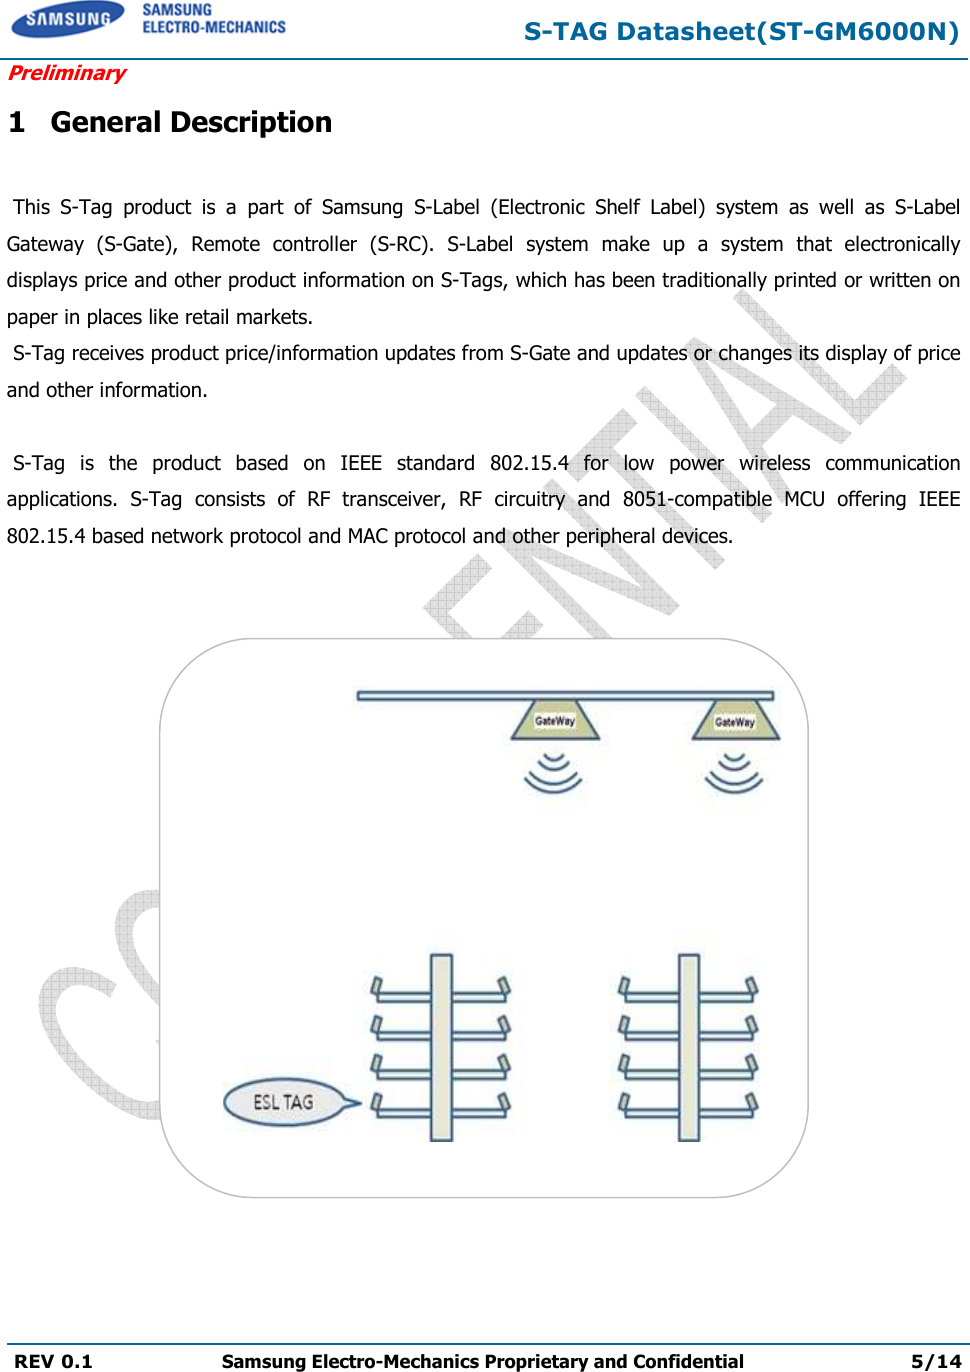  S-TAG Datasheet(ST-GM6000N) Preliminary REV 0.1  Samsung Electro-Mechanics Proprietary and Confidential 5/14   1 General Description   This  S-Tag  product  is  a  part  of  Samsung  S-Label  (Electronic  Shelf  Label)  system  as  well  as  S-Label Gateway  (S-Gate),  Remote  controller  (S-RC).  S-Label  system  make  up  a  system  that  electronically displays price and other product information on S-Tags, which has been traditionally printed or written on paper in places like retail markets.  S-Tag receives product price/information updates from S-Gate and updates or changes its display of price and other information.   S-Tag  is  the  product  based  on  IEEE  standard  802.15.4  for  low  power  wireless  communication applications.  S-Tag  consists  of  RF  transceiver,  RF  circuitry  and  8051-compatible  MCU  offering  IEEE 802.15.4 based network protocol and MAC protocol and other peripheral devices.    